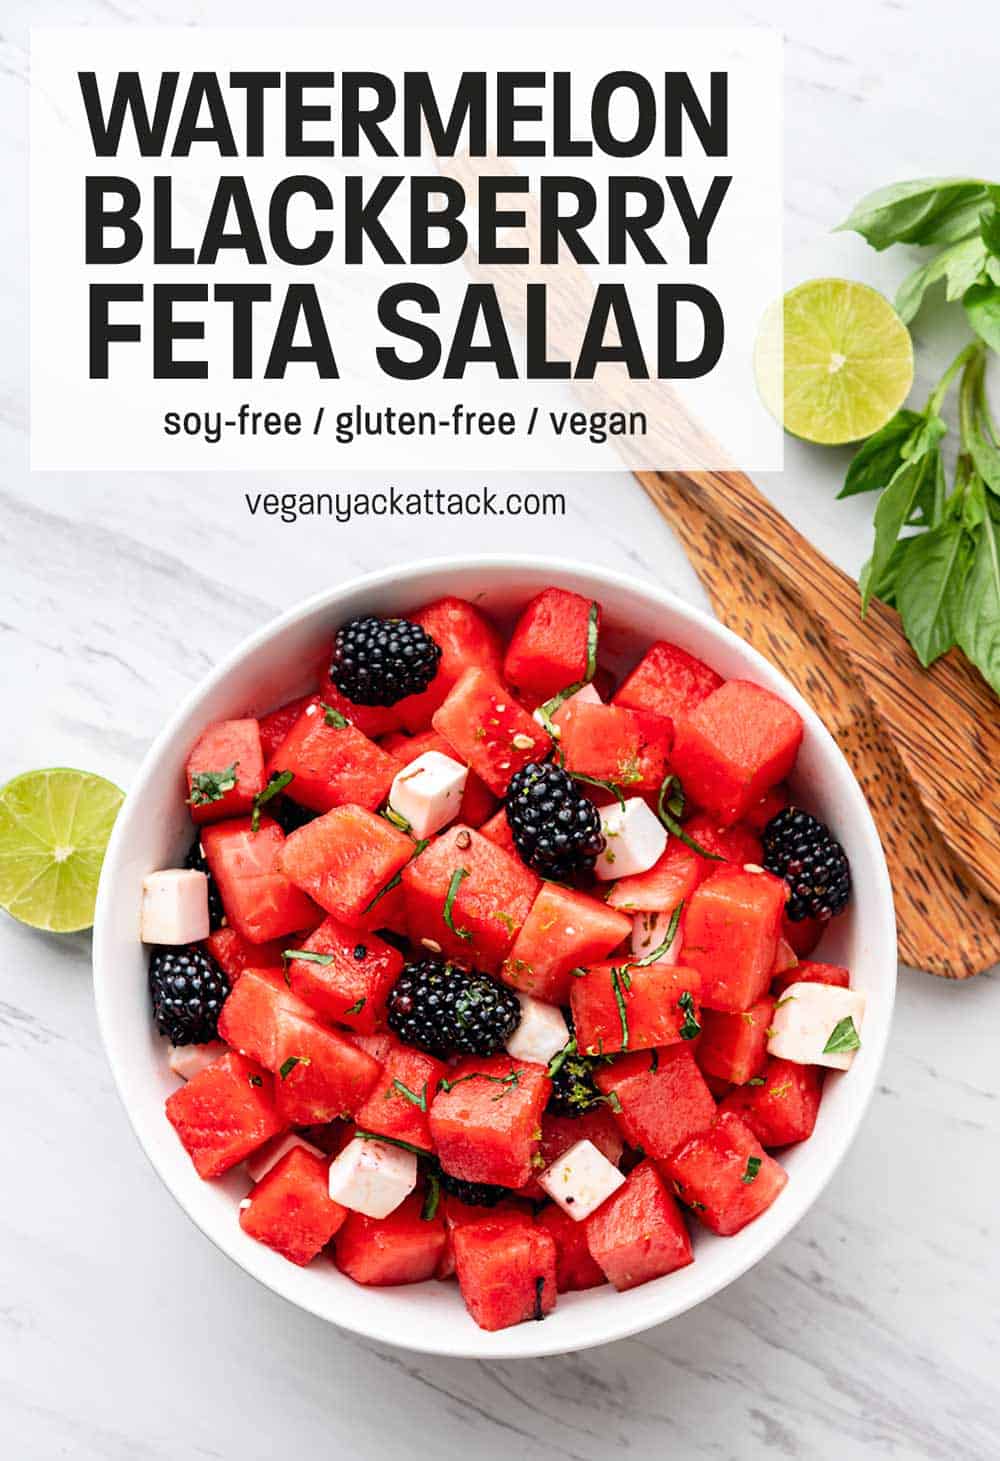 Large white bowl filled with fruit salad with overlay text reading "Watermelon Blackberry Feta Salad"